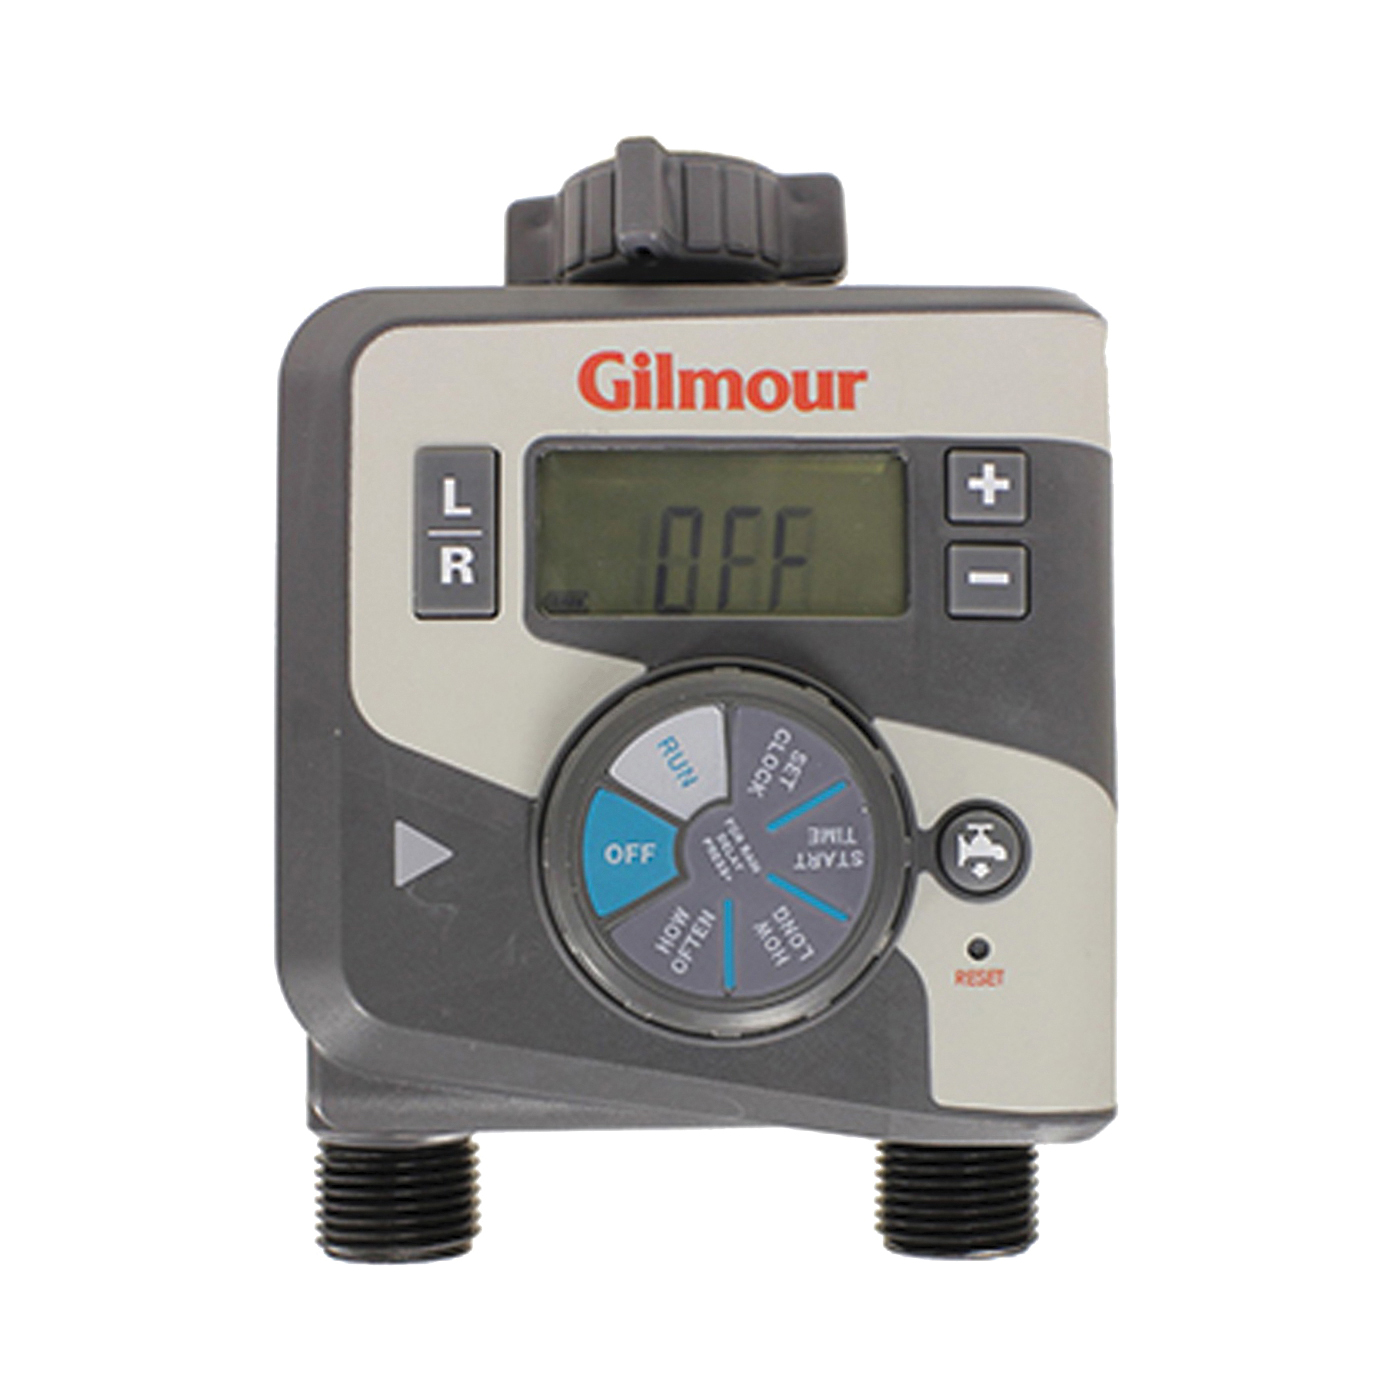 Gilmour 804014-5001 Dual Outlet Timer - 1